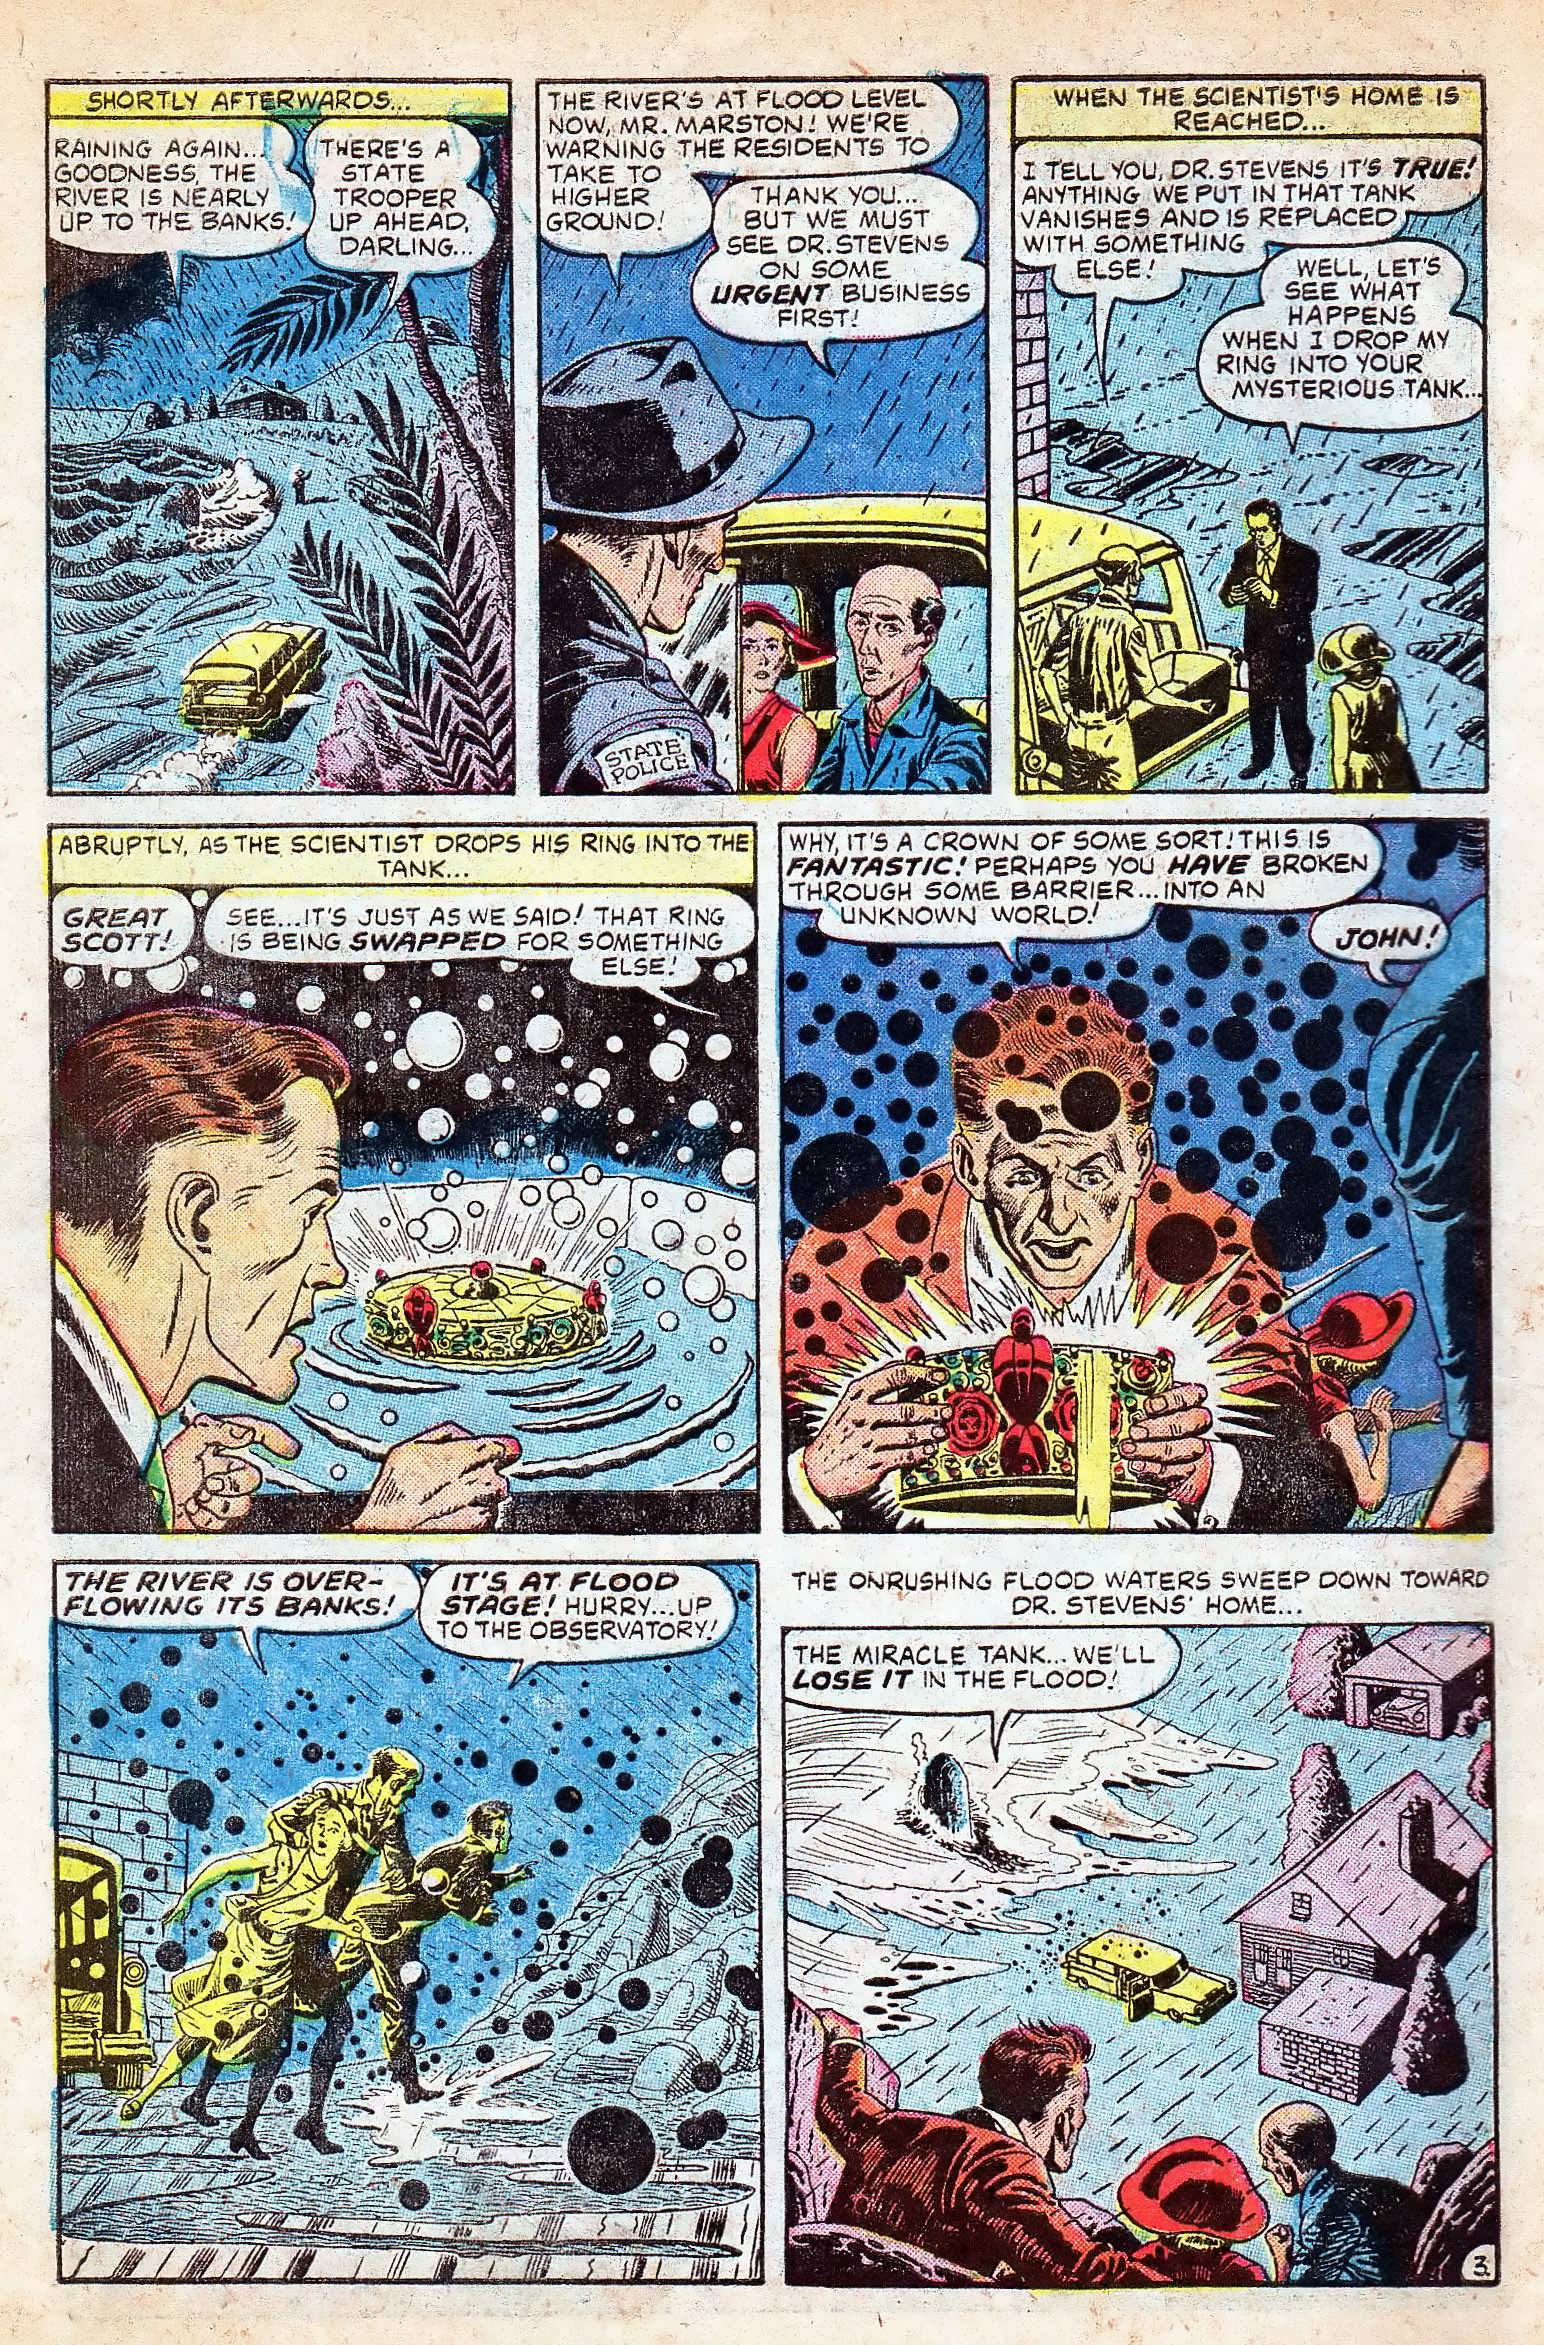 Marvel Tales (1949) 141 Page 9